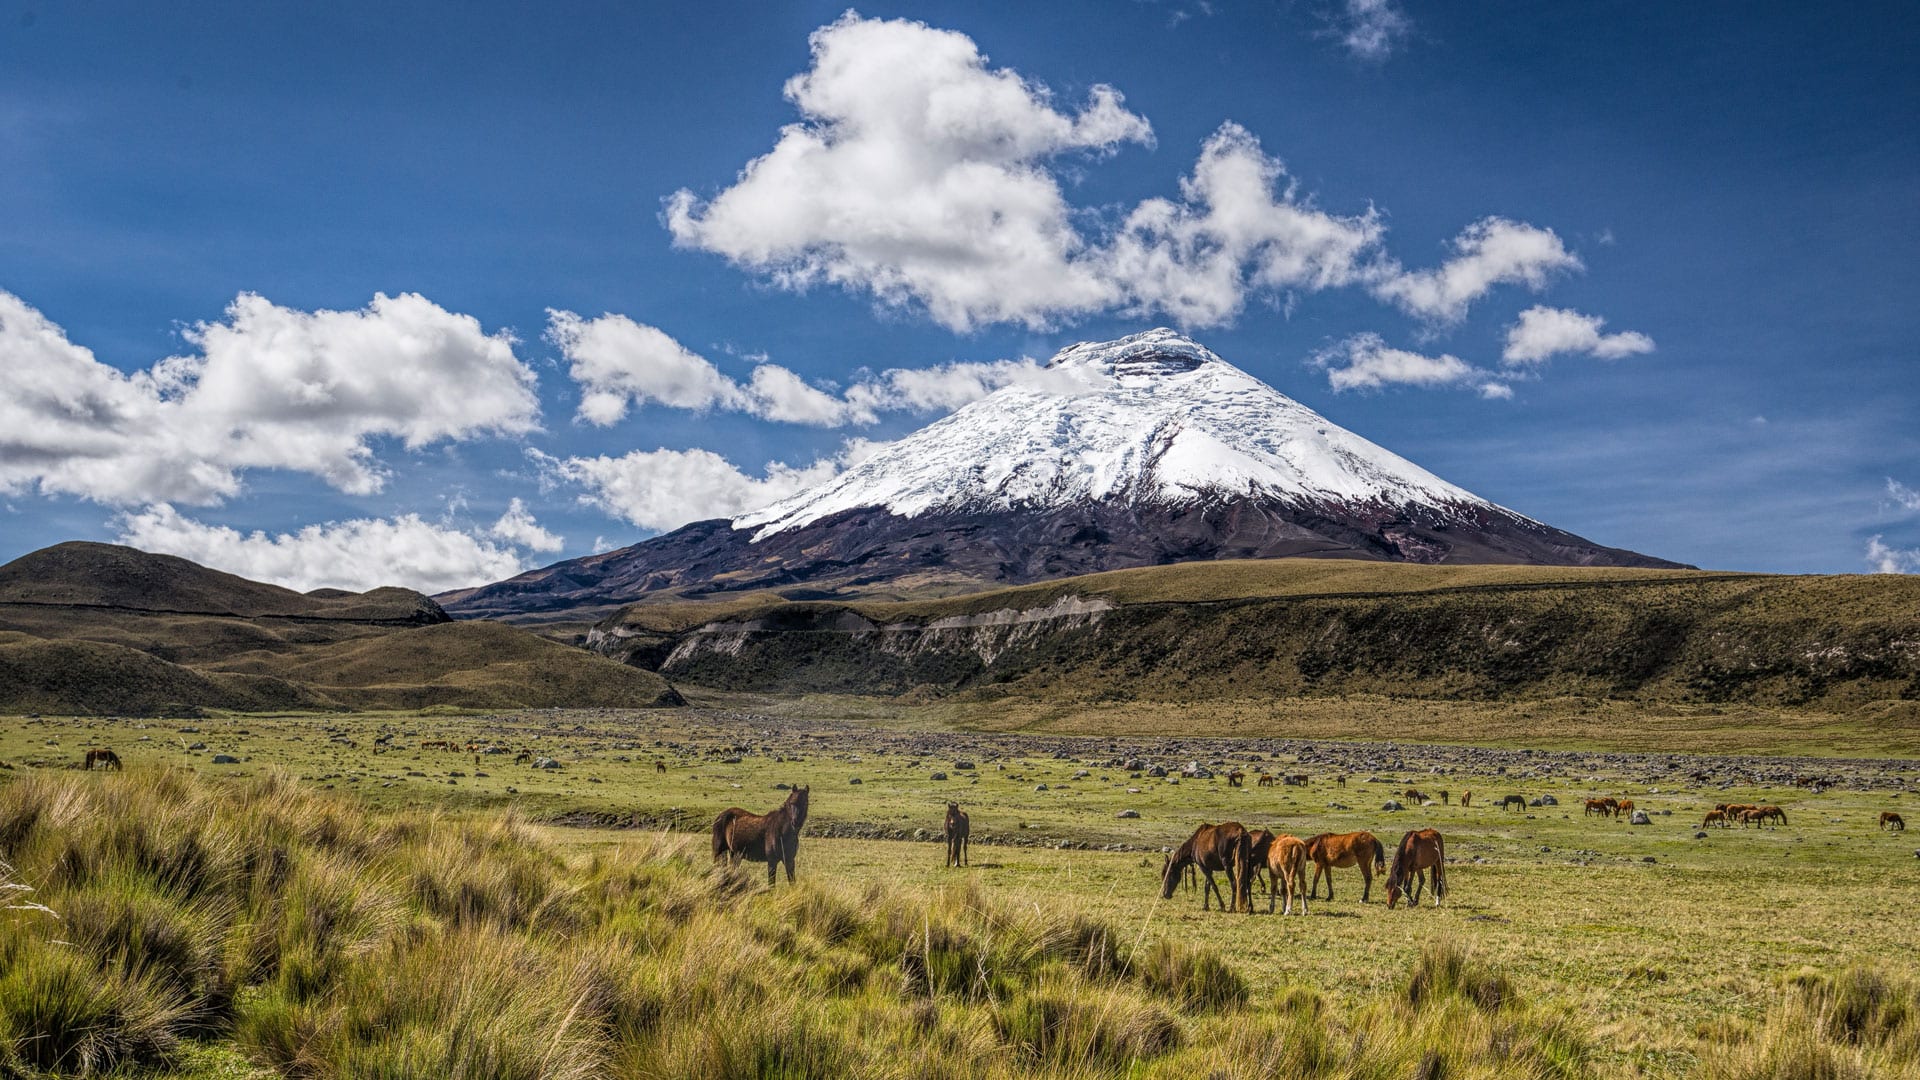 Cotopaxi National Park Visit. One of the Highest Active Volcanoes